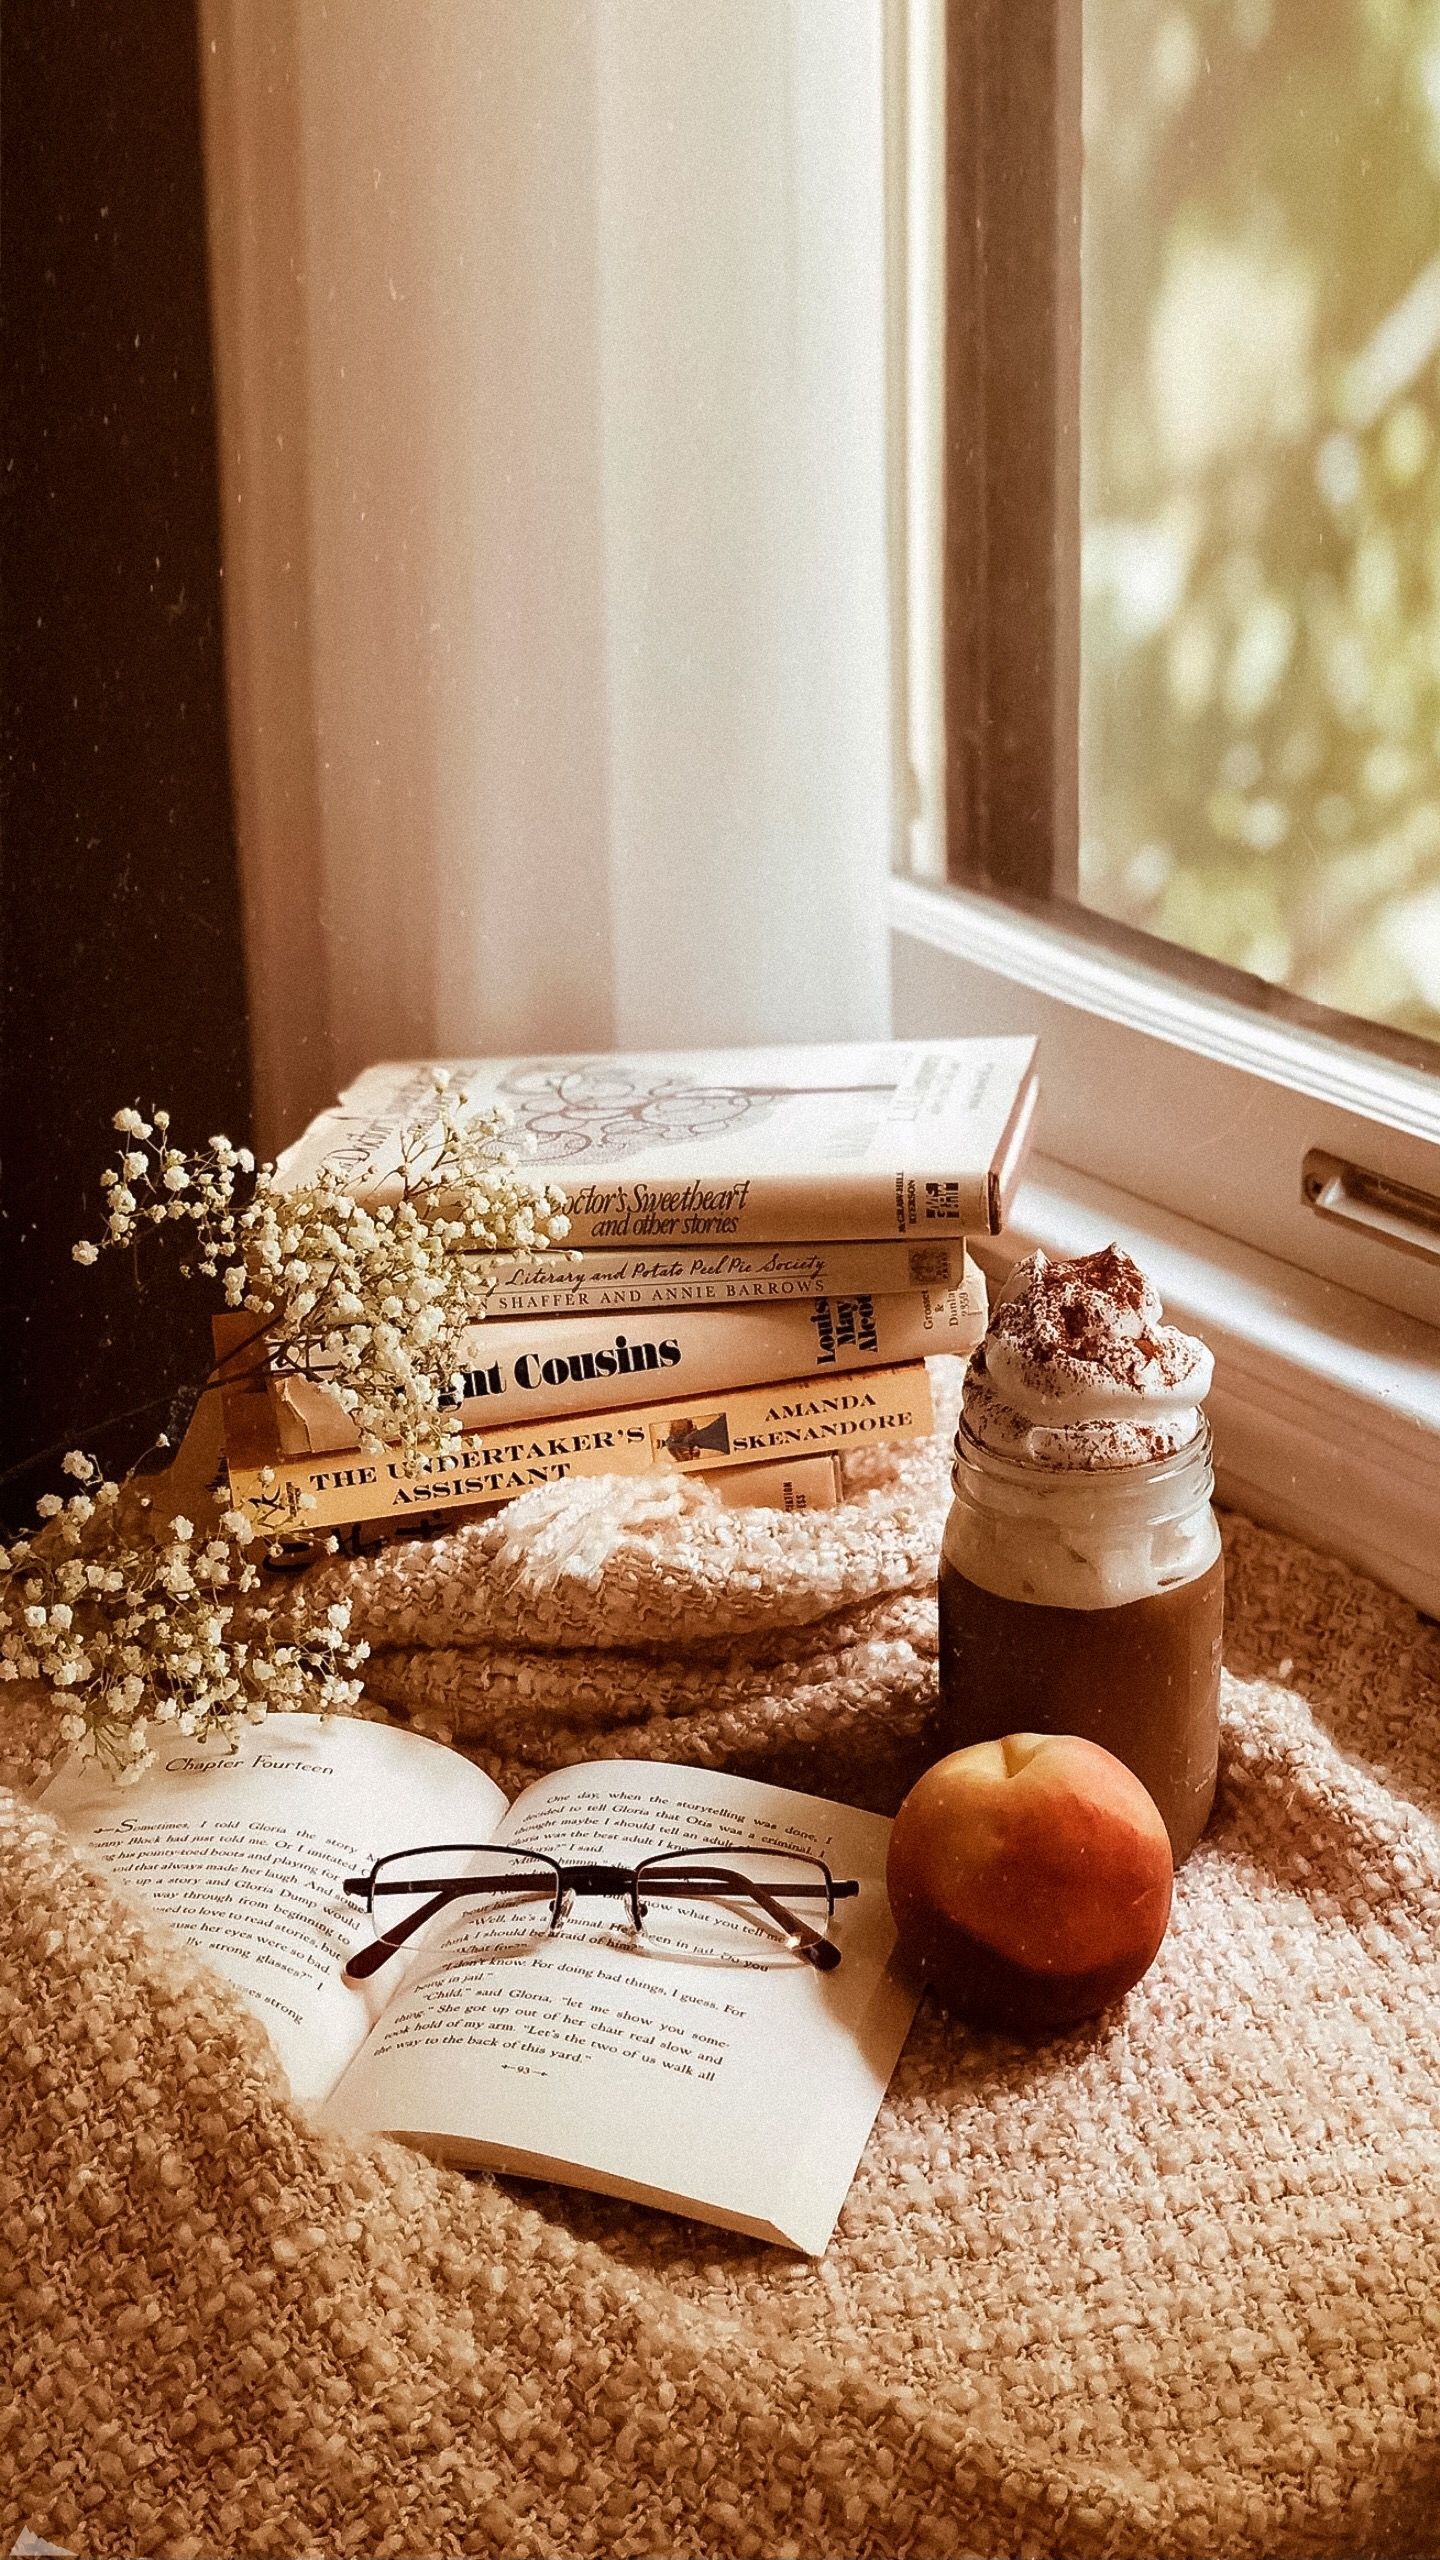 A book, a cup of coffee, a peach, and a pair of glasses on a blanket in front of a window. - Cozy